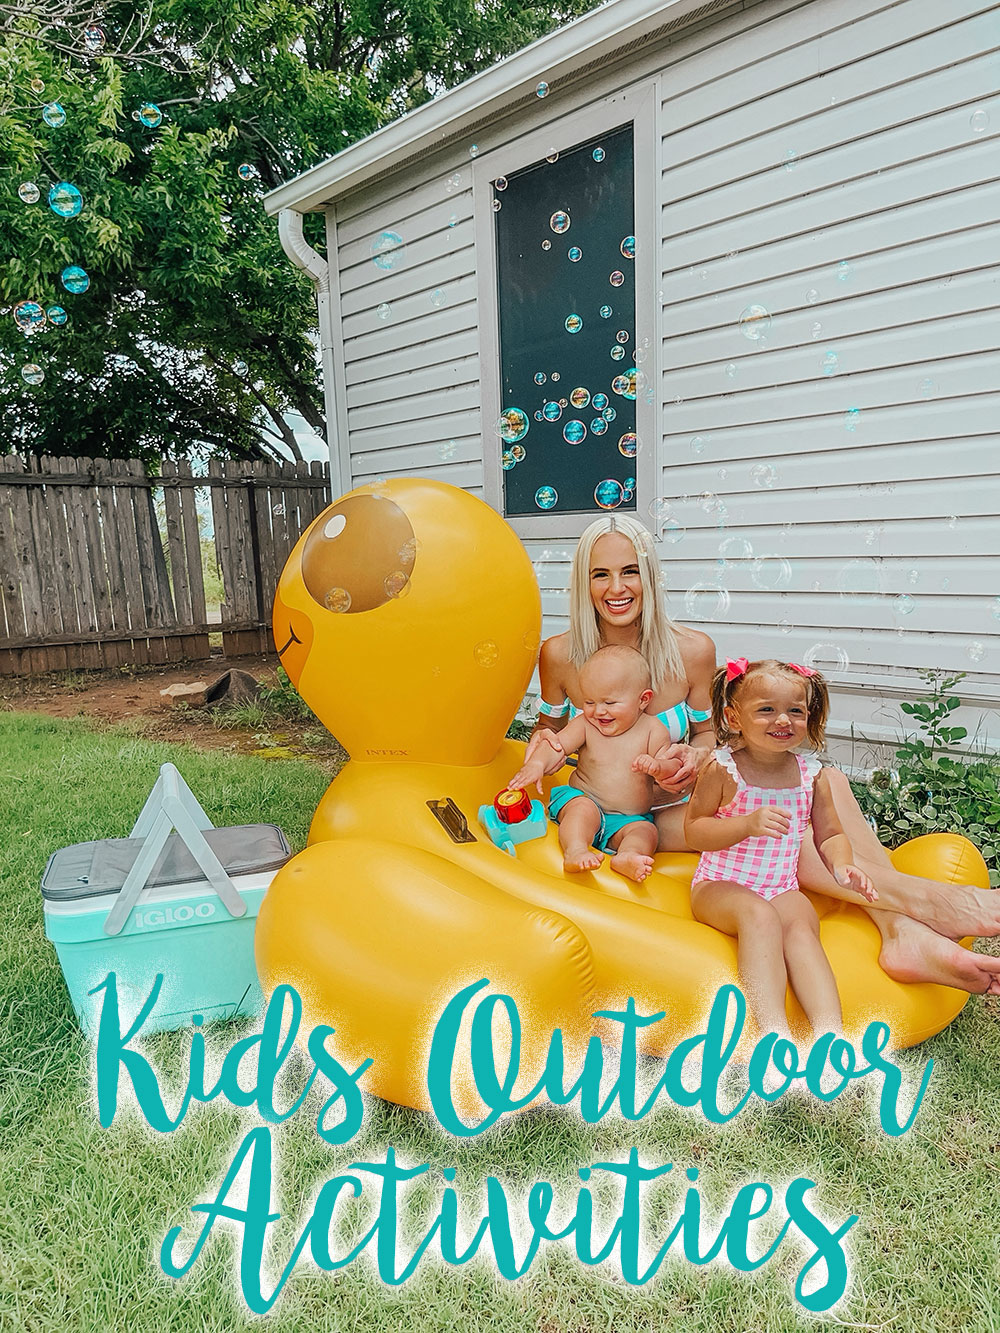 outdoor activities for kids - fun ideas to do outside